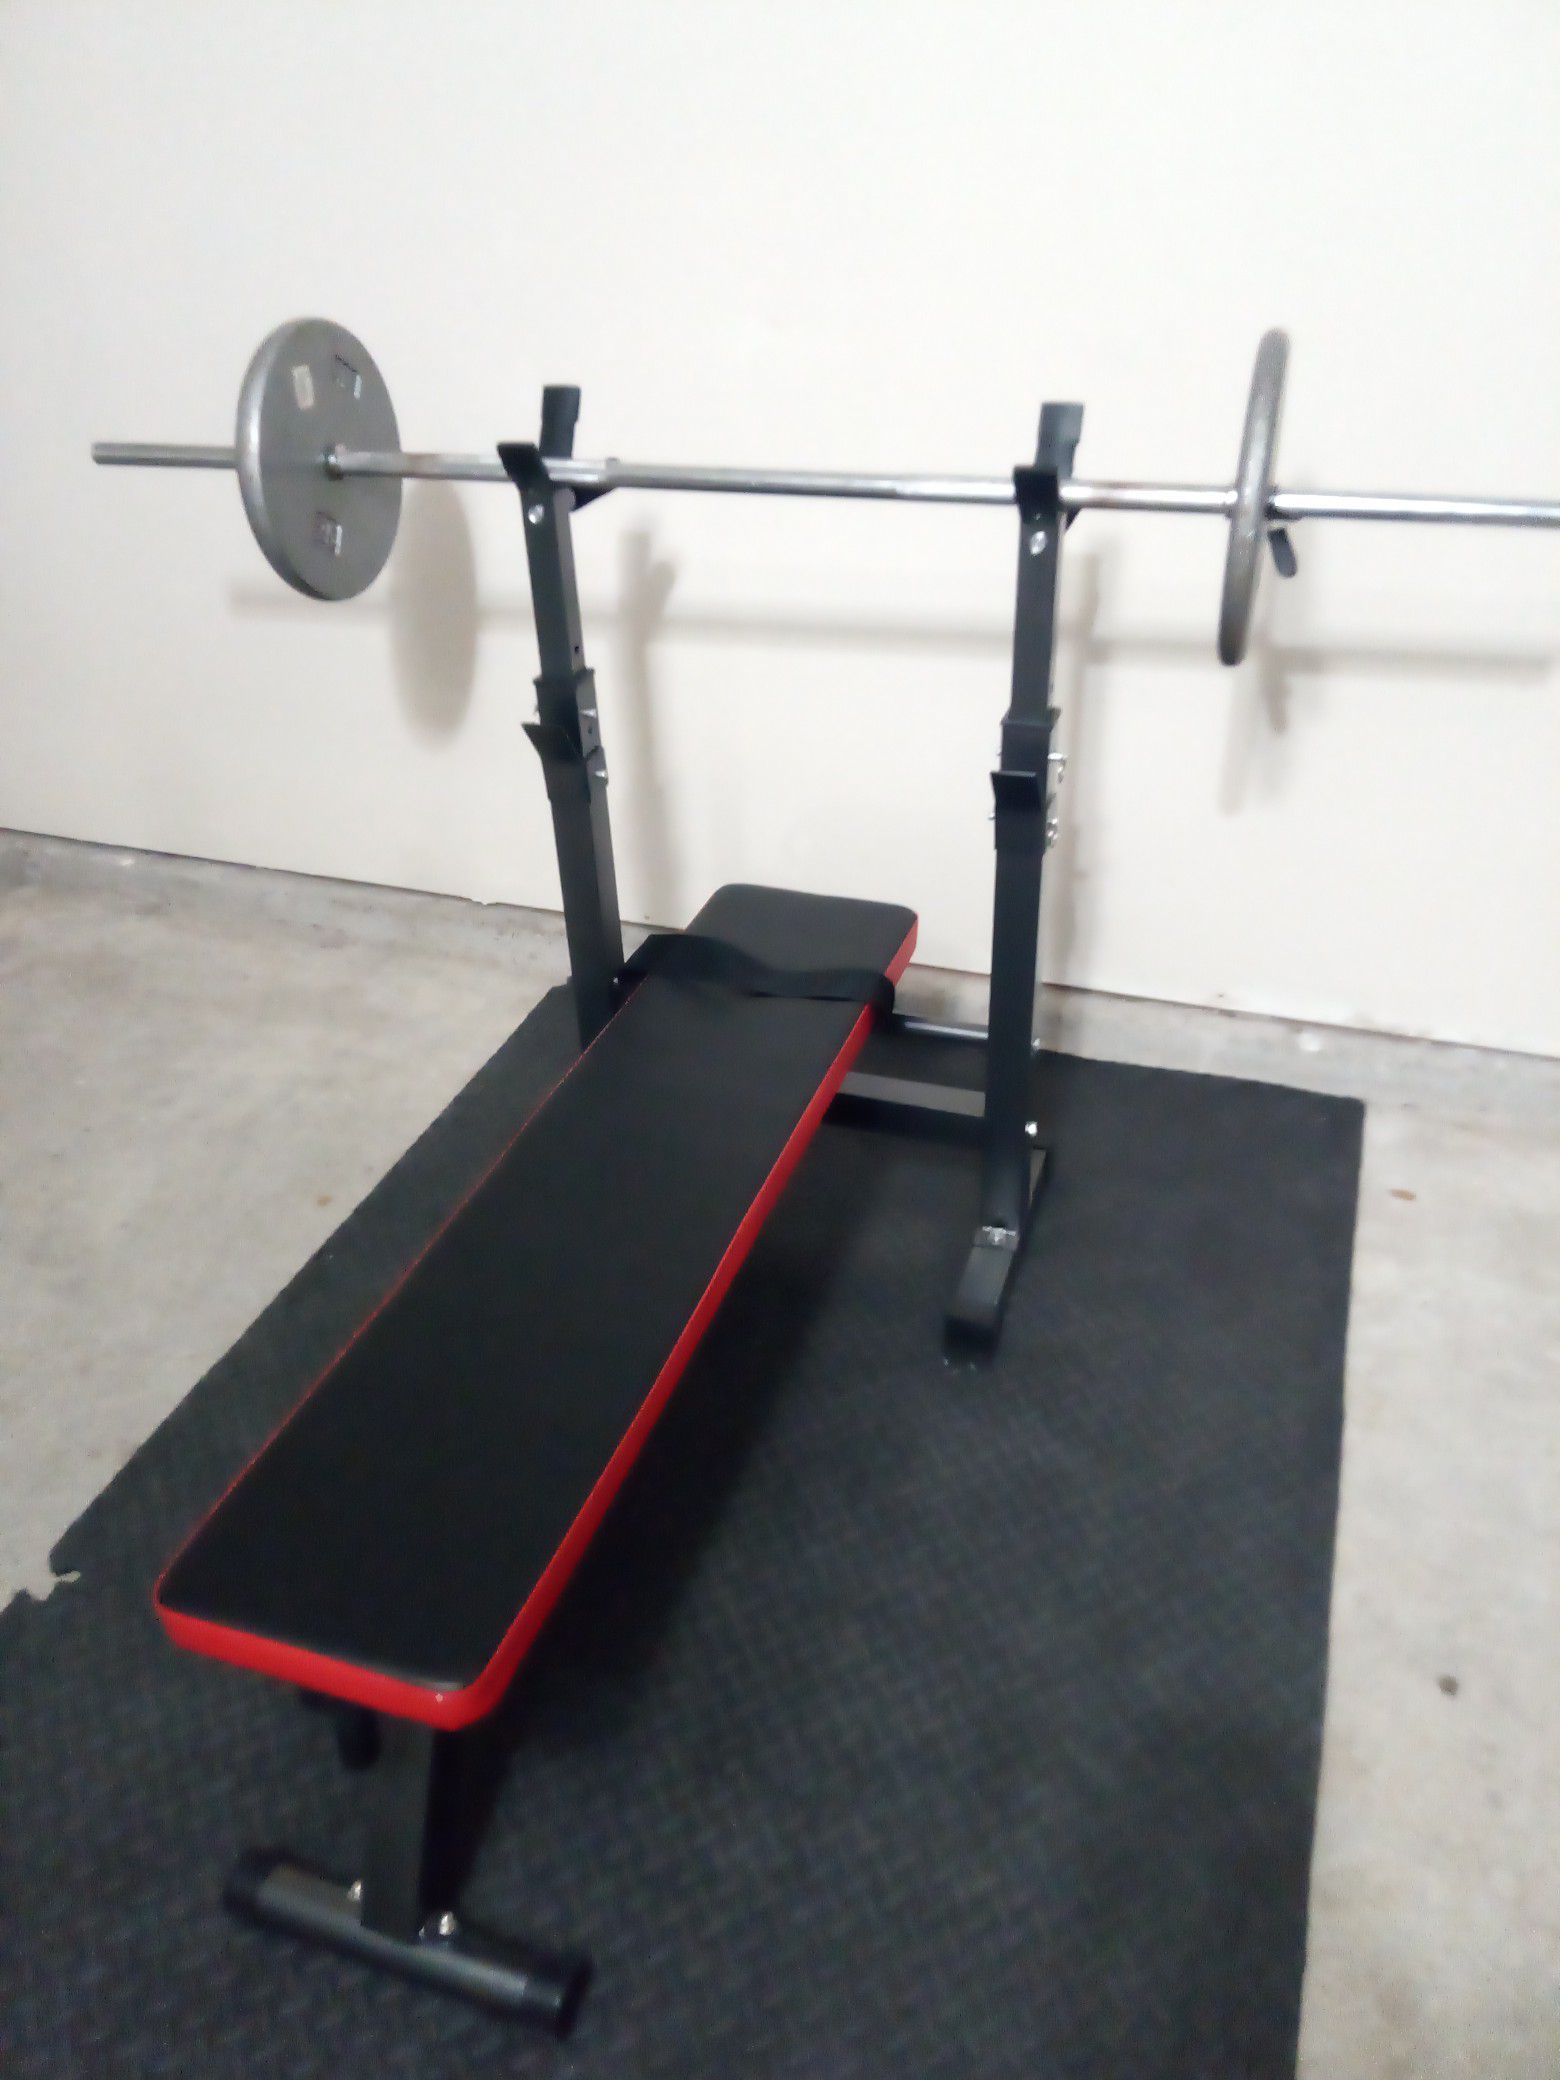 Weight bench, barbell + 50lbs. (exercise set)